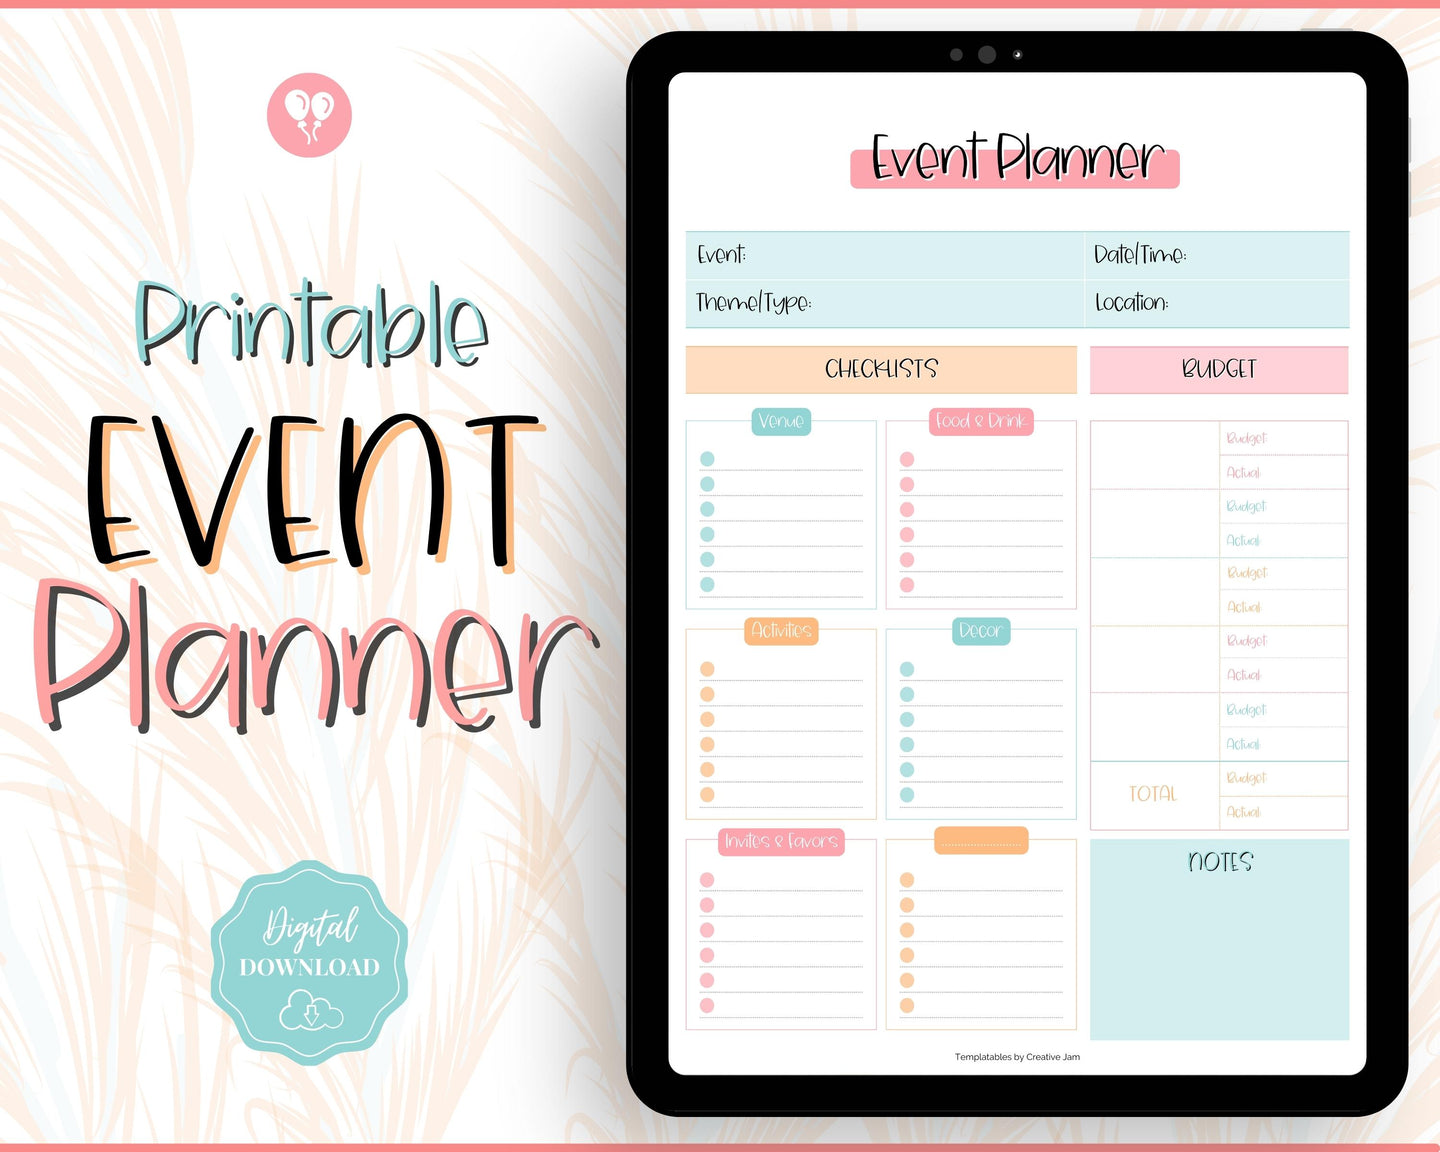 Event Planner Template, Printable Party Planner, Birthday, Wedding, Bridal, Budget, Invites, Event Plan Set, Party Organizer | Colorful Sky